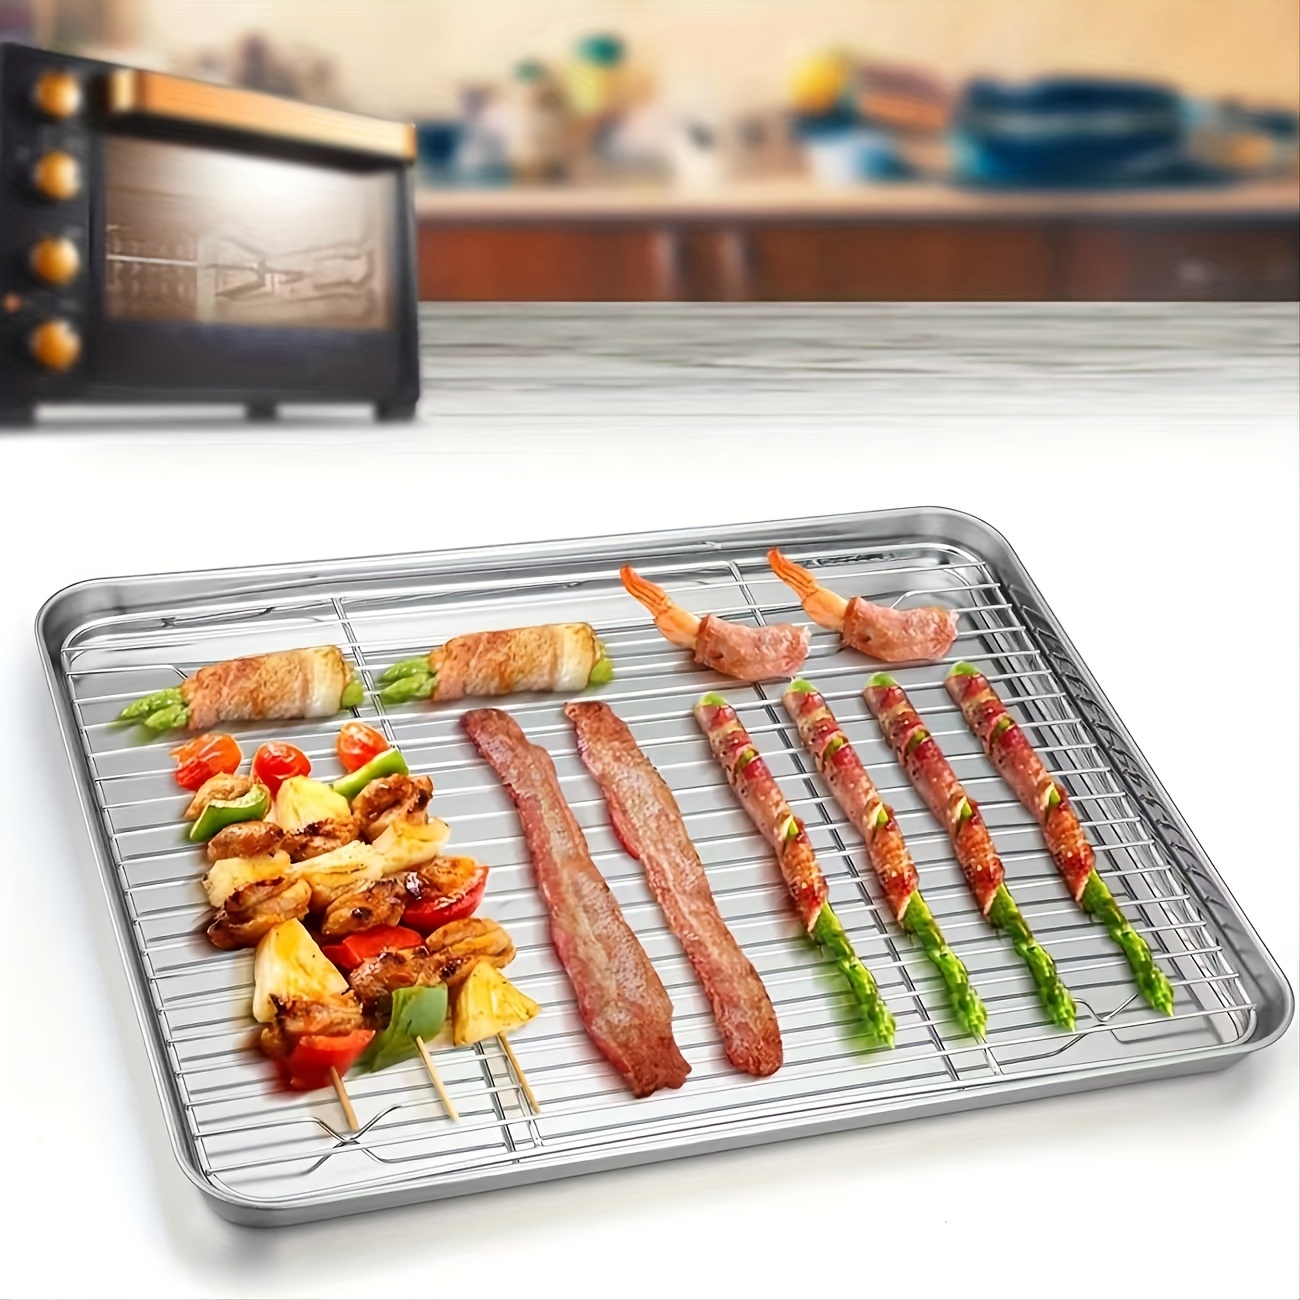 Aluminum Baking Sheet with Stainless Steel Cooling Rack Set